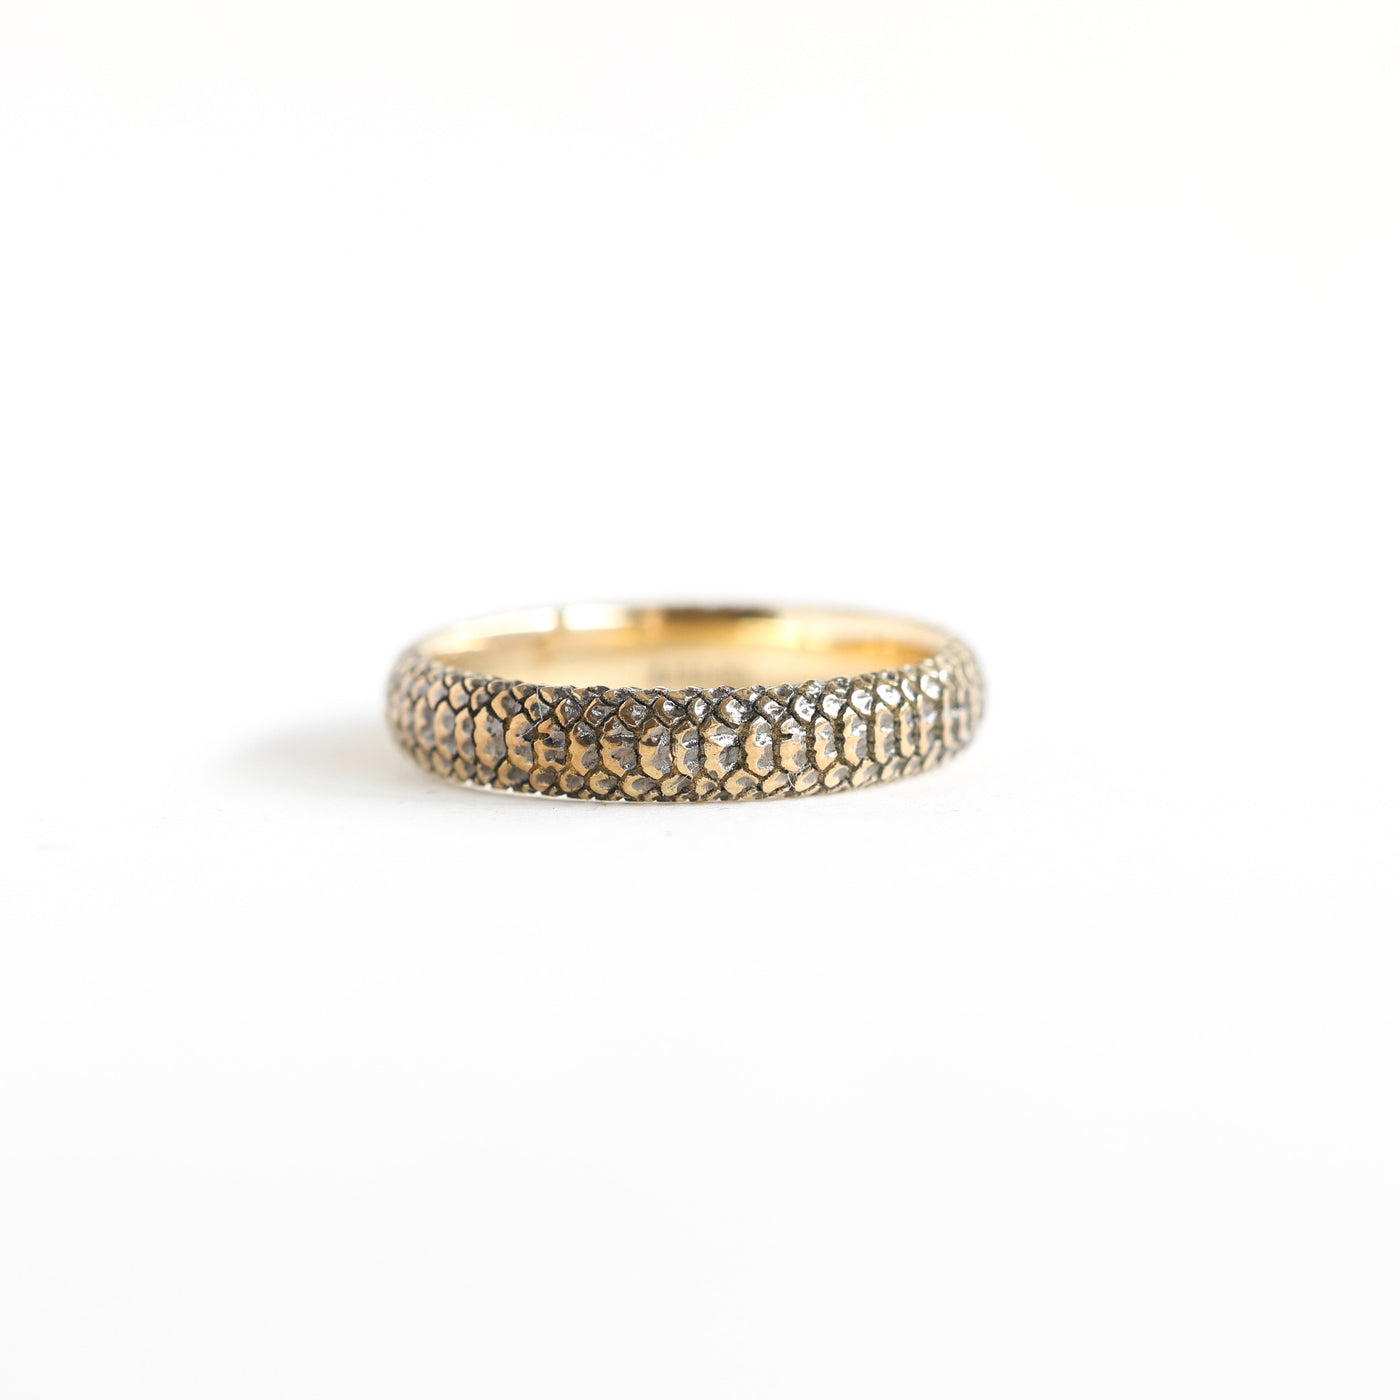 Gold snake band textured ring, featuring a unique snake skin pattern. Crafted in 14k or 18k gold, with customization options for gemstones.